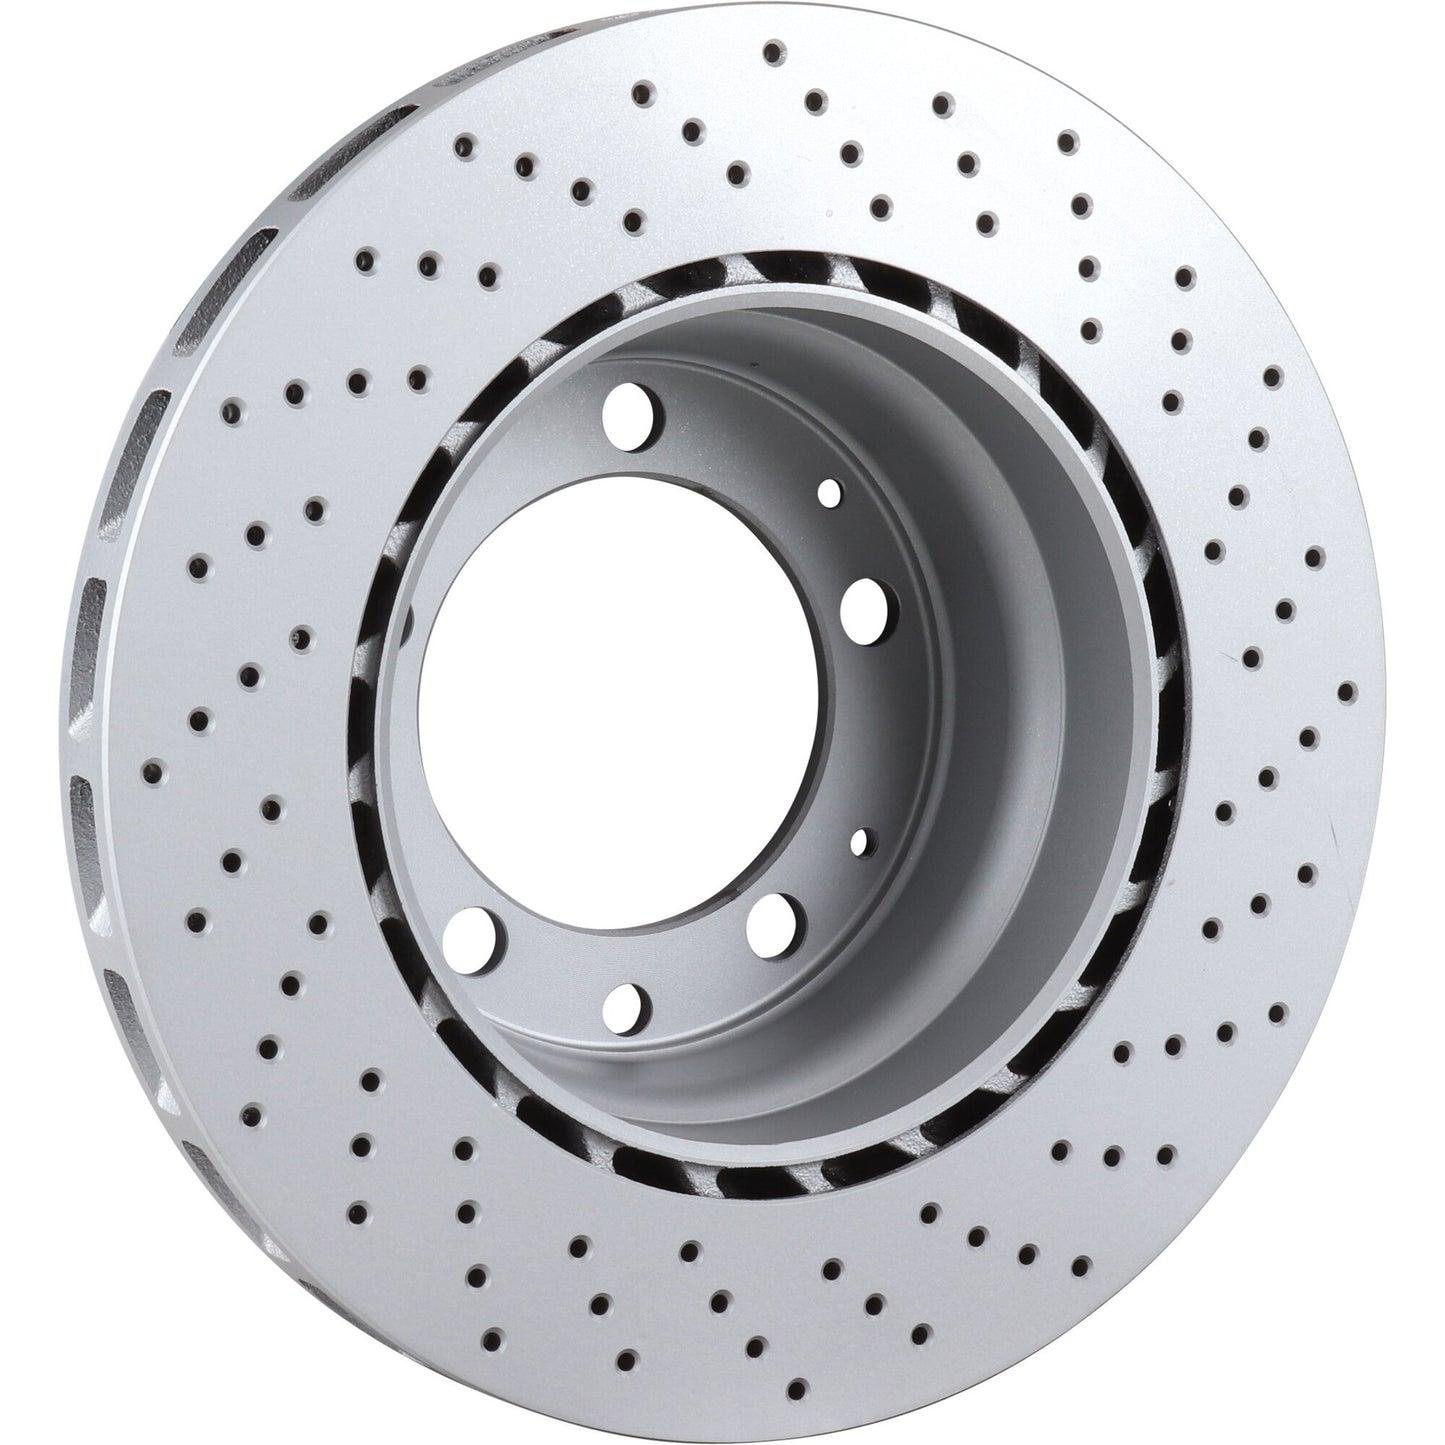 Brake Disc, Rear, Left, 309x28 mm, Coated, 930 (77-86) - Sierra Madre Collection